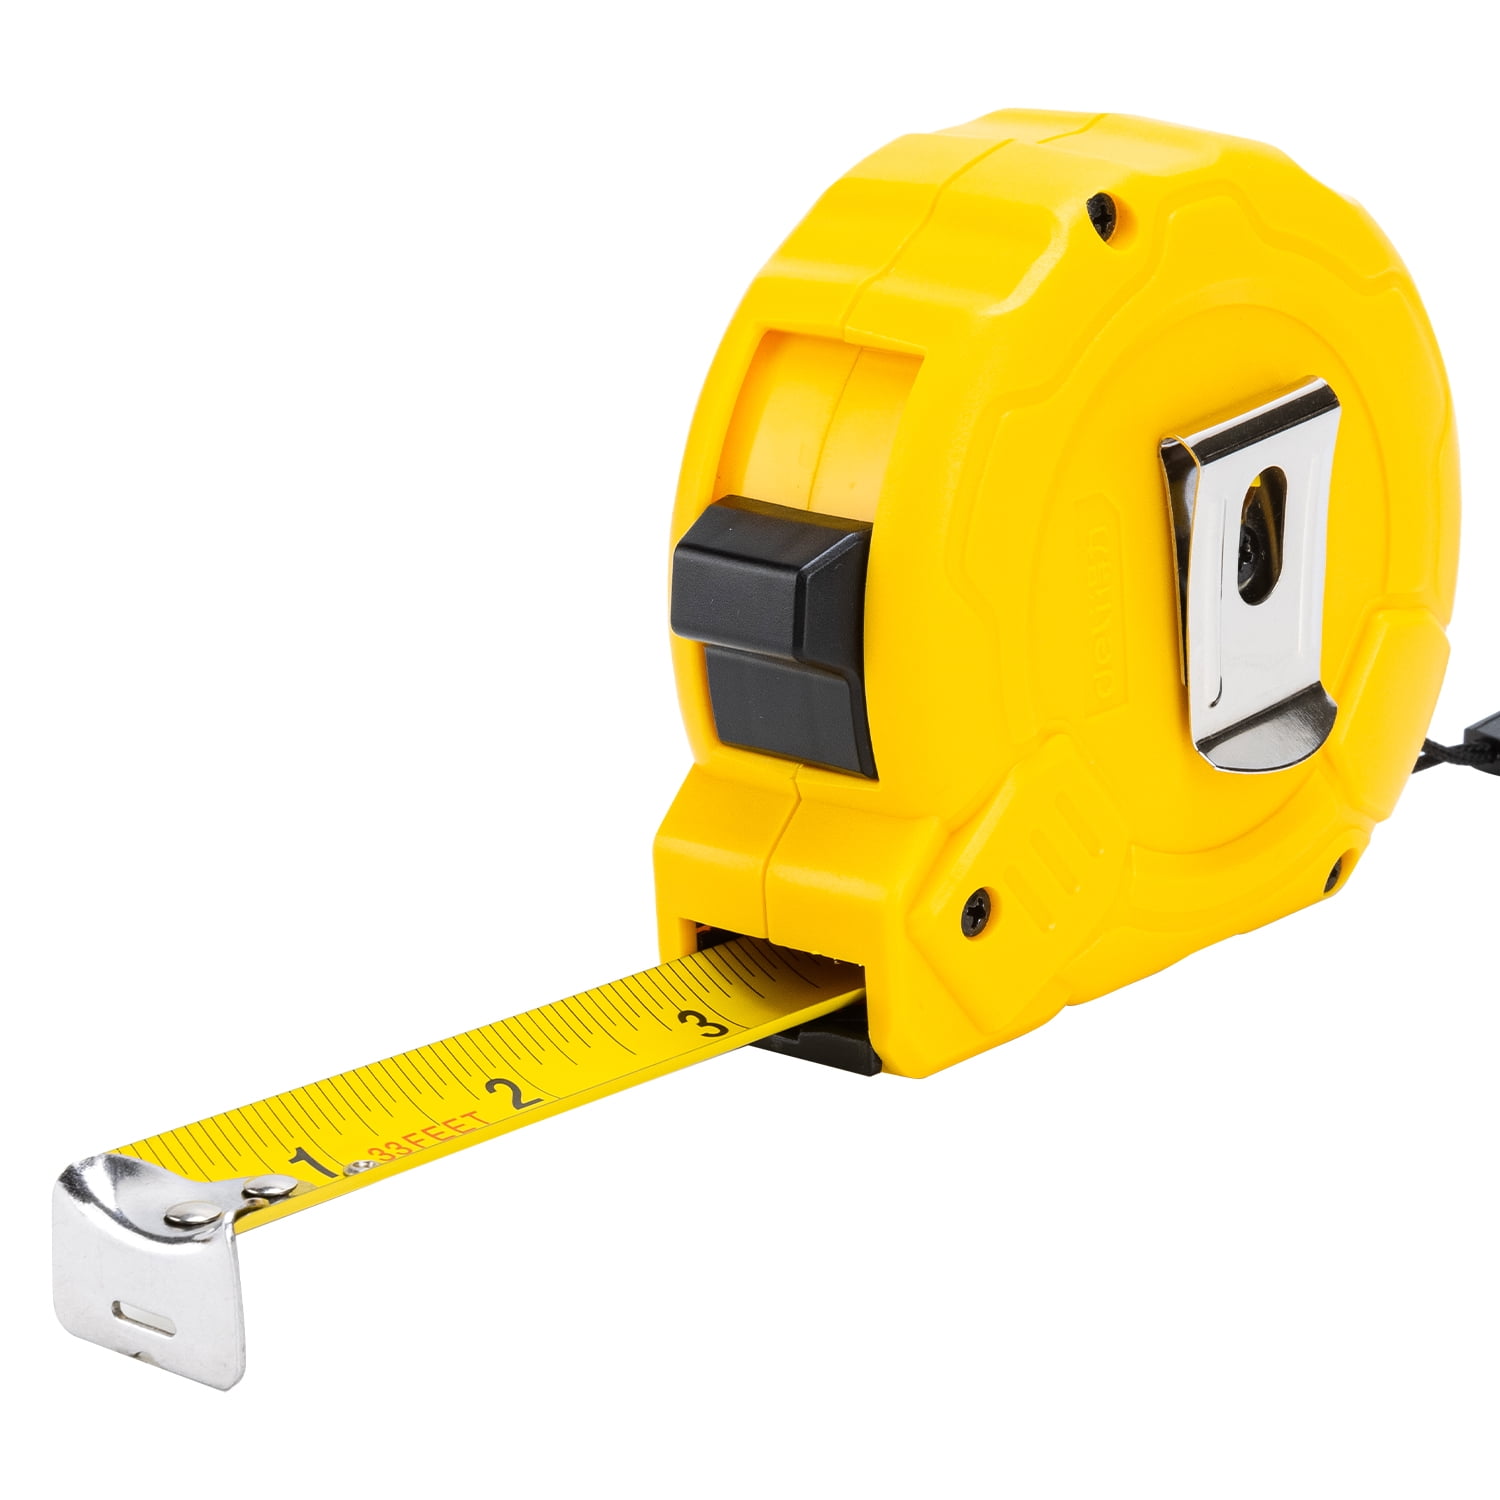 Promotional Tape Measures (25. Ft., Yellow with Black Trim)